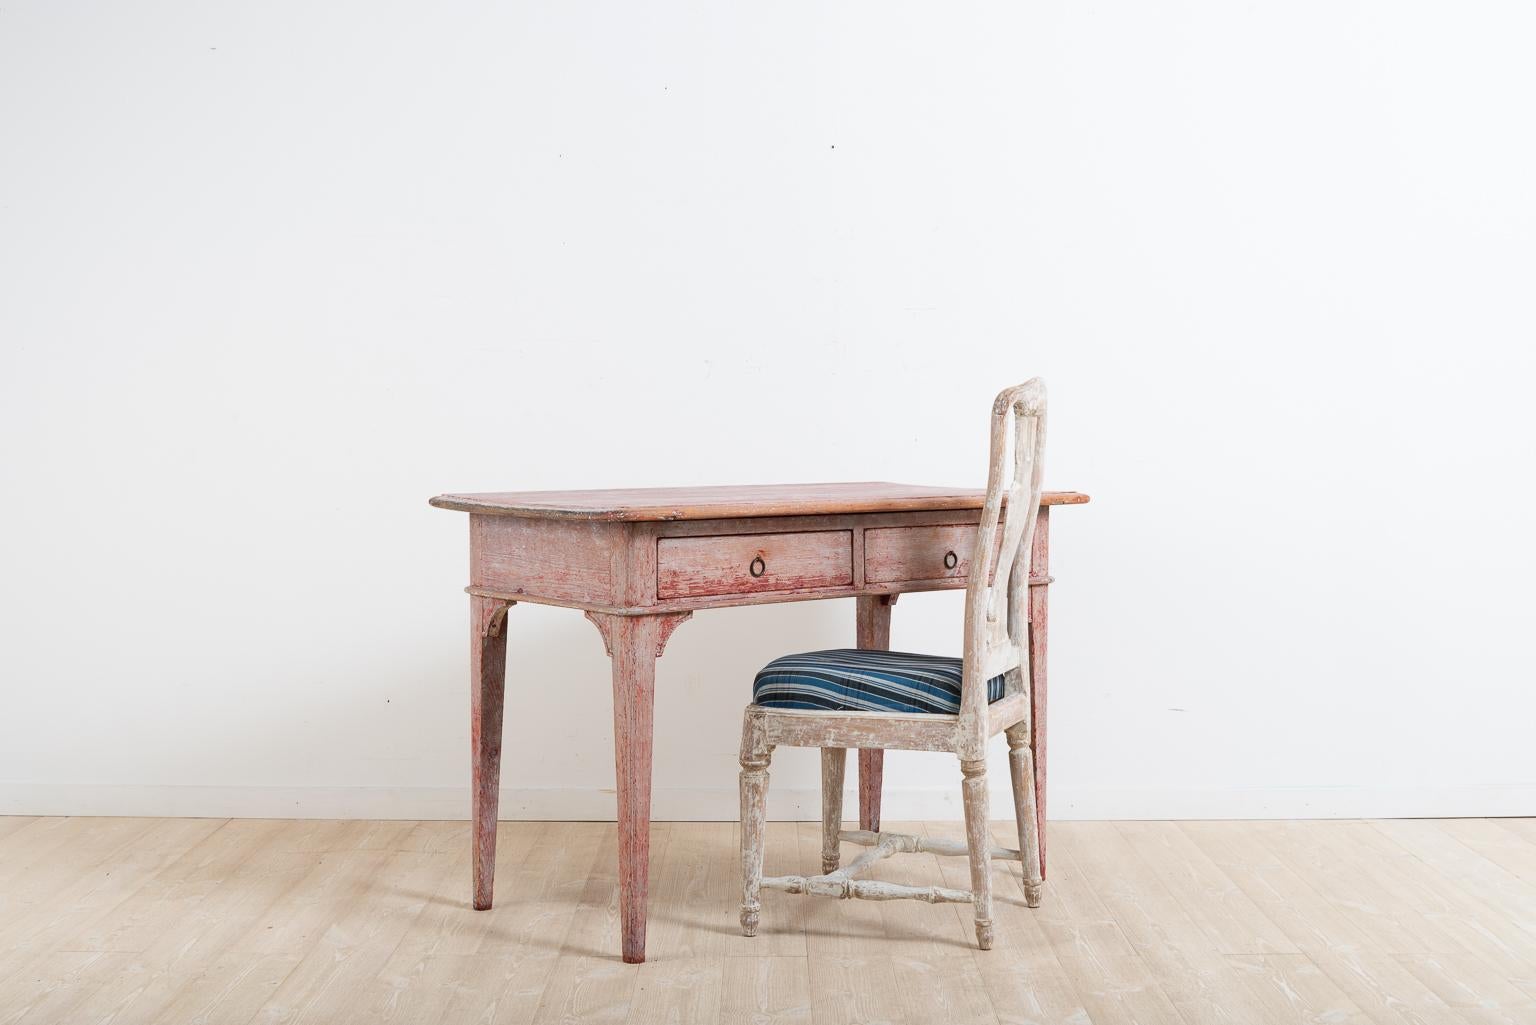 Early 19th century Swedish table. The table can both be used as a desk and side table. The table is manufactured in Gustavian Style with the characteristic straight tapered legs. Two drawers and dry scraped paint. Crafted circa 1820 in northern